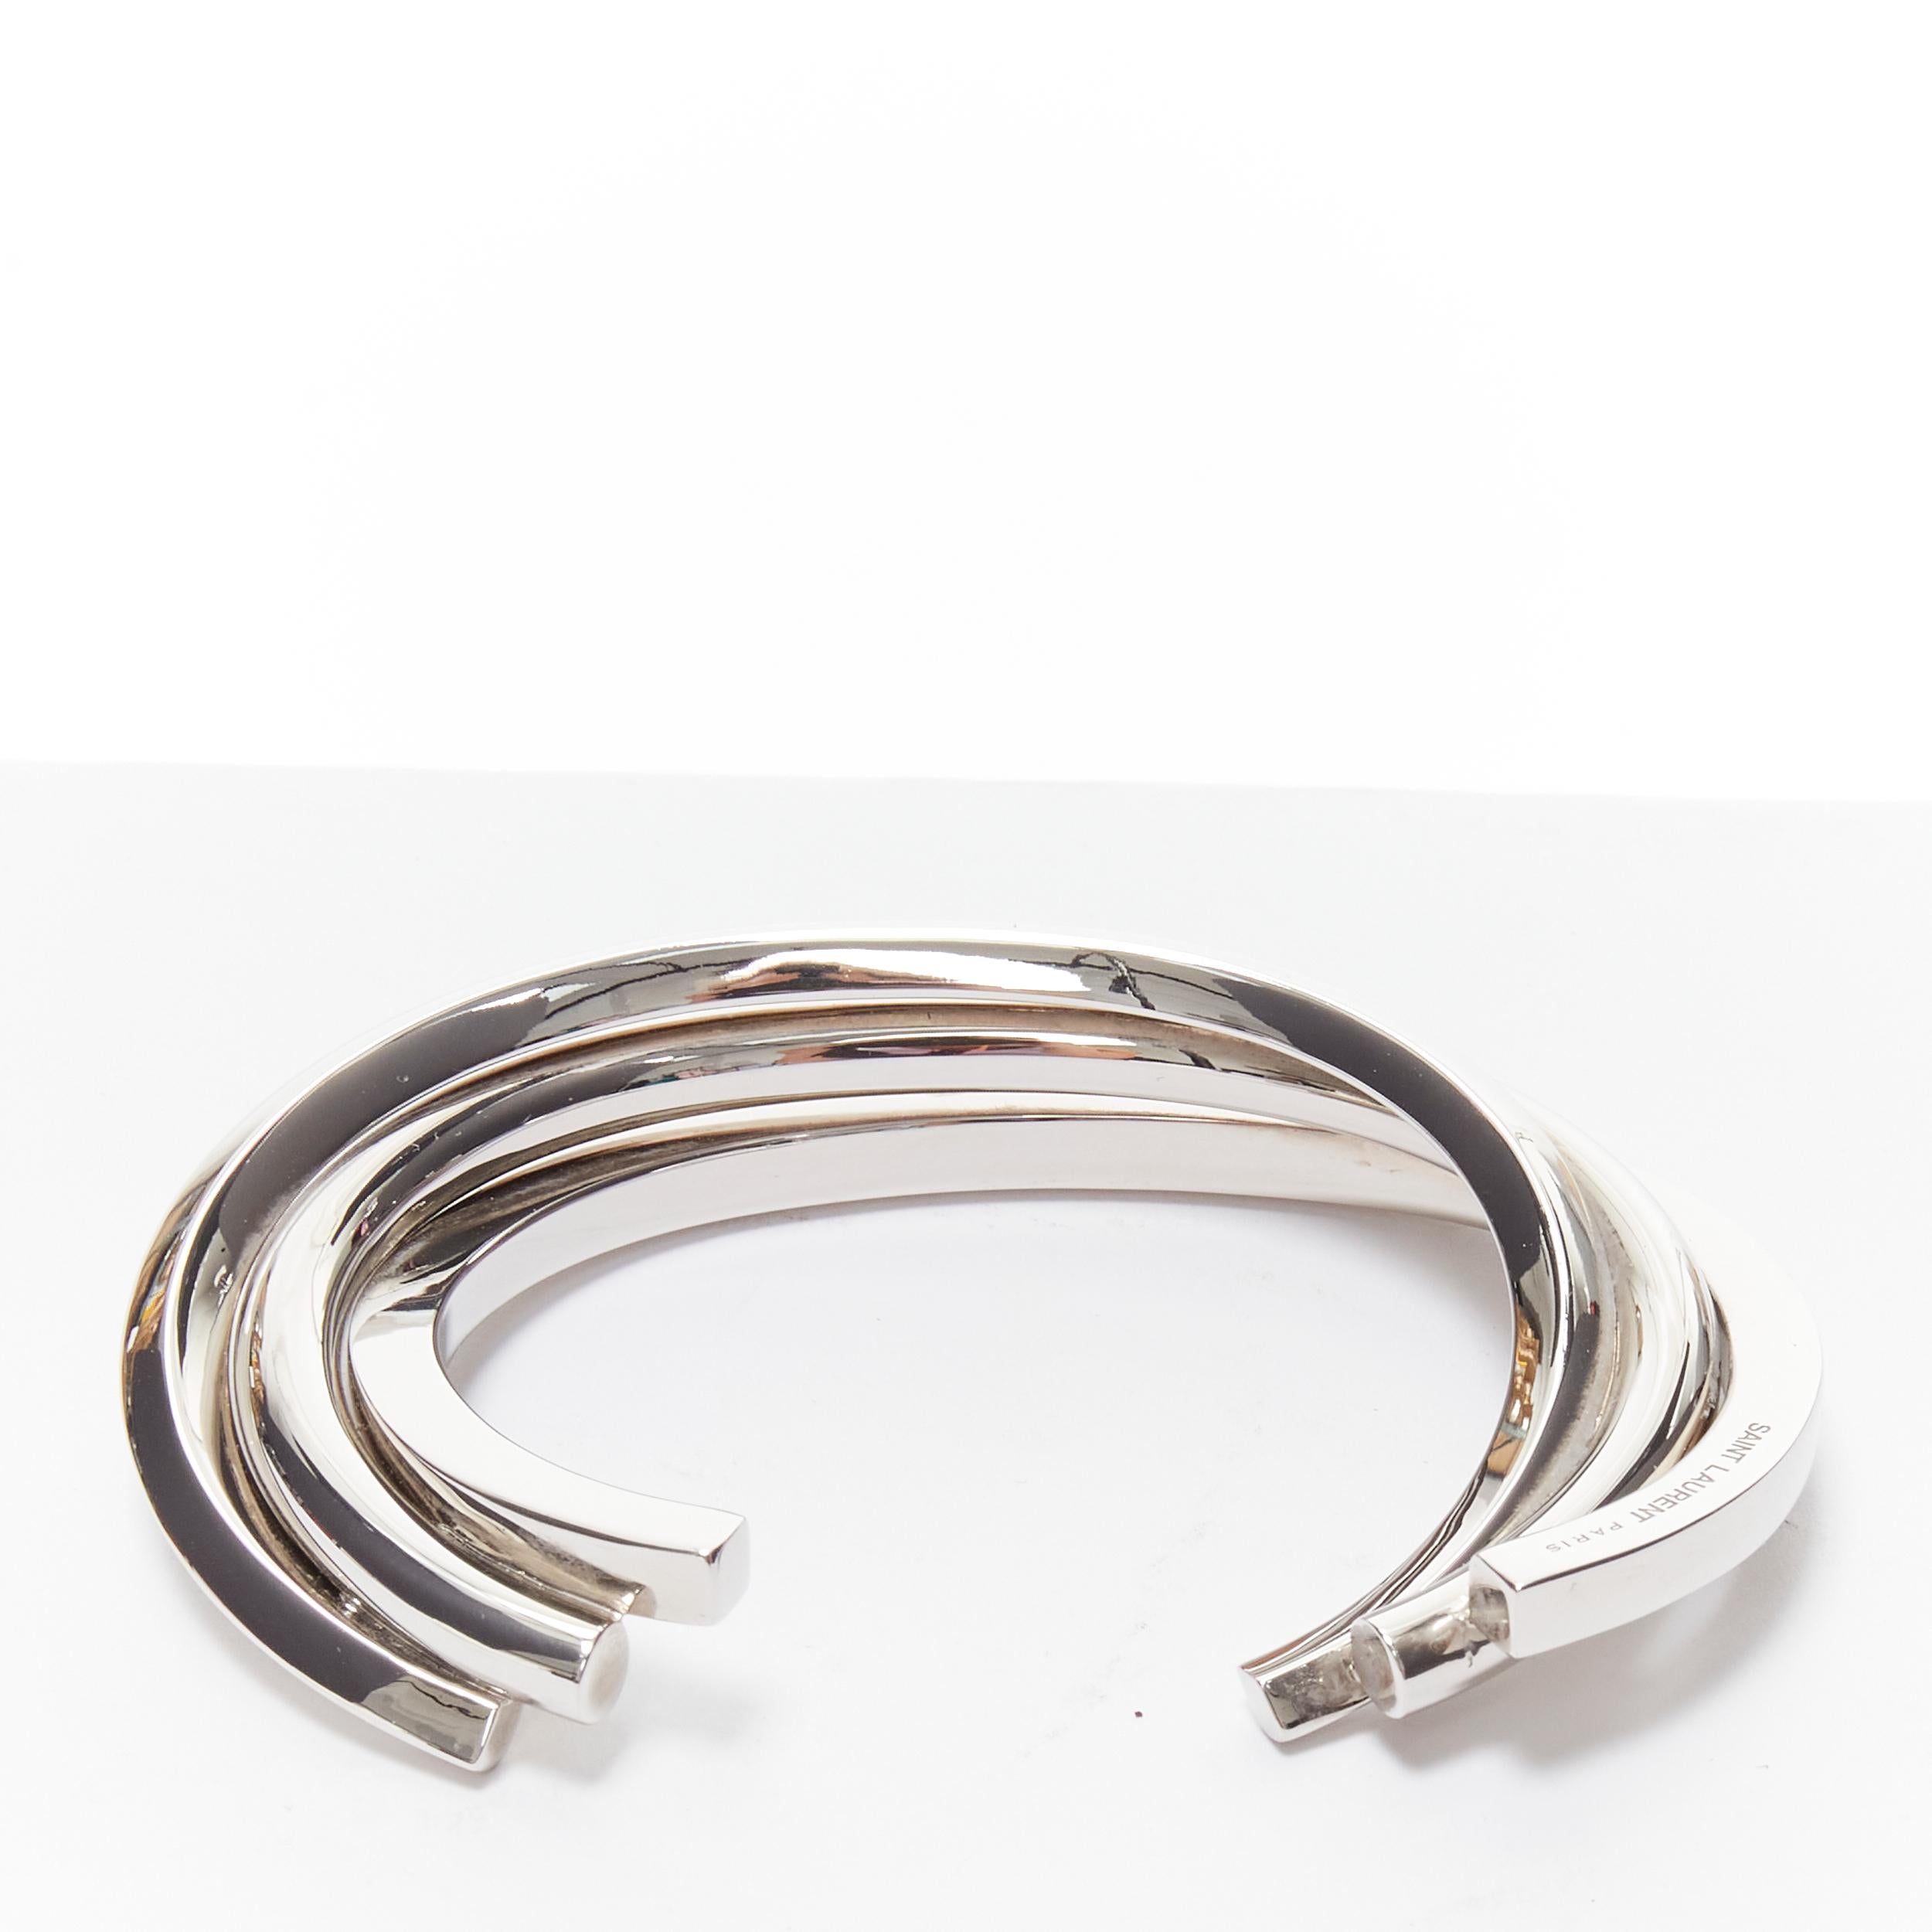 SAINT LAURENT Hedi Slimane silver brass architectural triple twist cuff bracelet
Reference: TGAS/B01799 
Brand: Saint Laurent 
Designer: Hedi Slimane 
Material: Brass 
Color: Silver 
Pattern: Solid 
Extra Detail: Hedi Slimane for Saint Laurent.